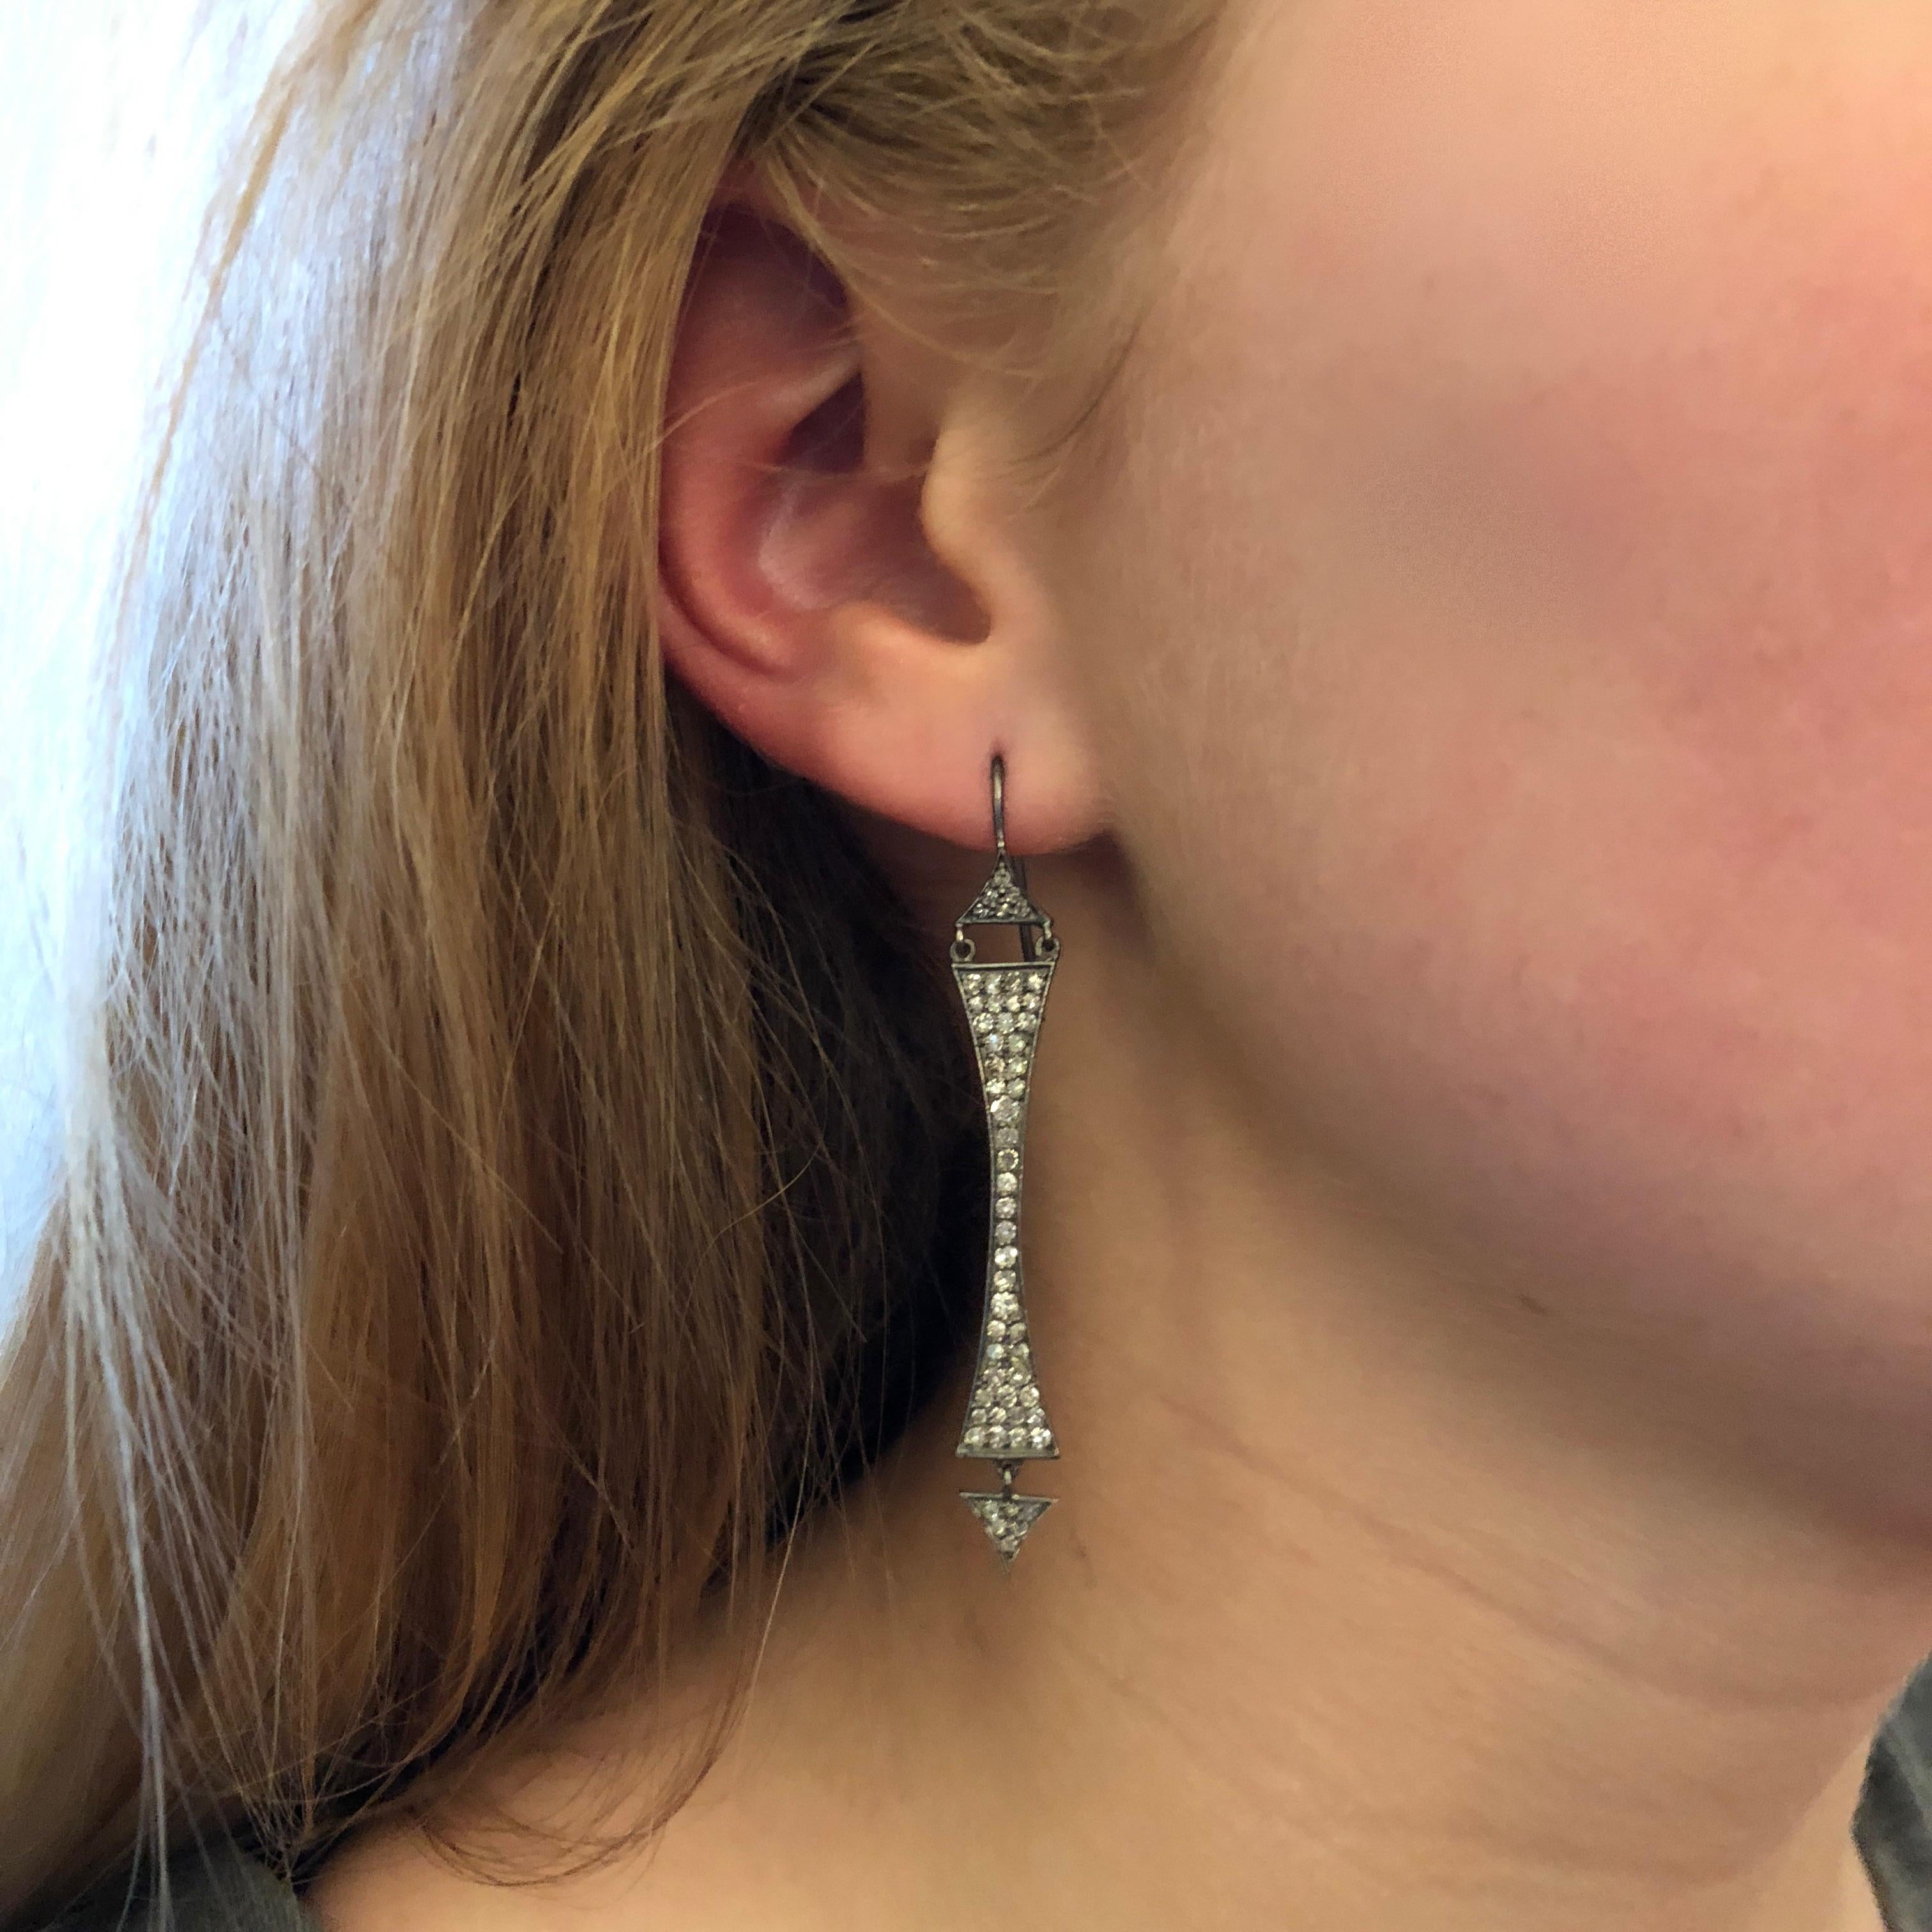 These dramatic sparkly white diamond and black silver earrings are sure to get you noticed.  Finished with black Rhodium over fine silver, these earrings will keep their blackened color forever.  Lightweight enough for all day wear, but definitely